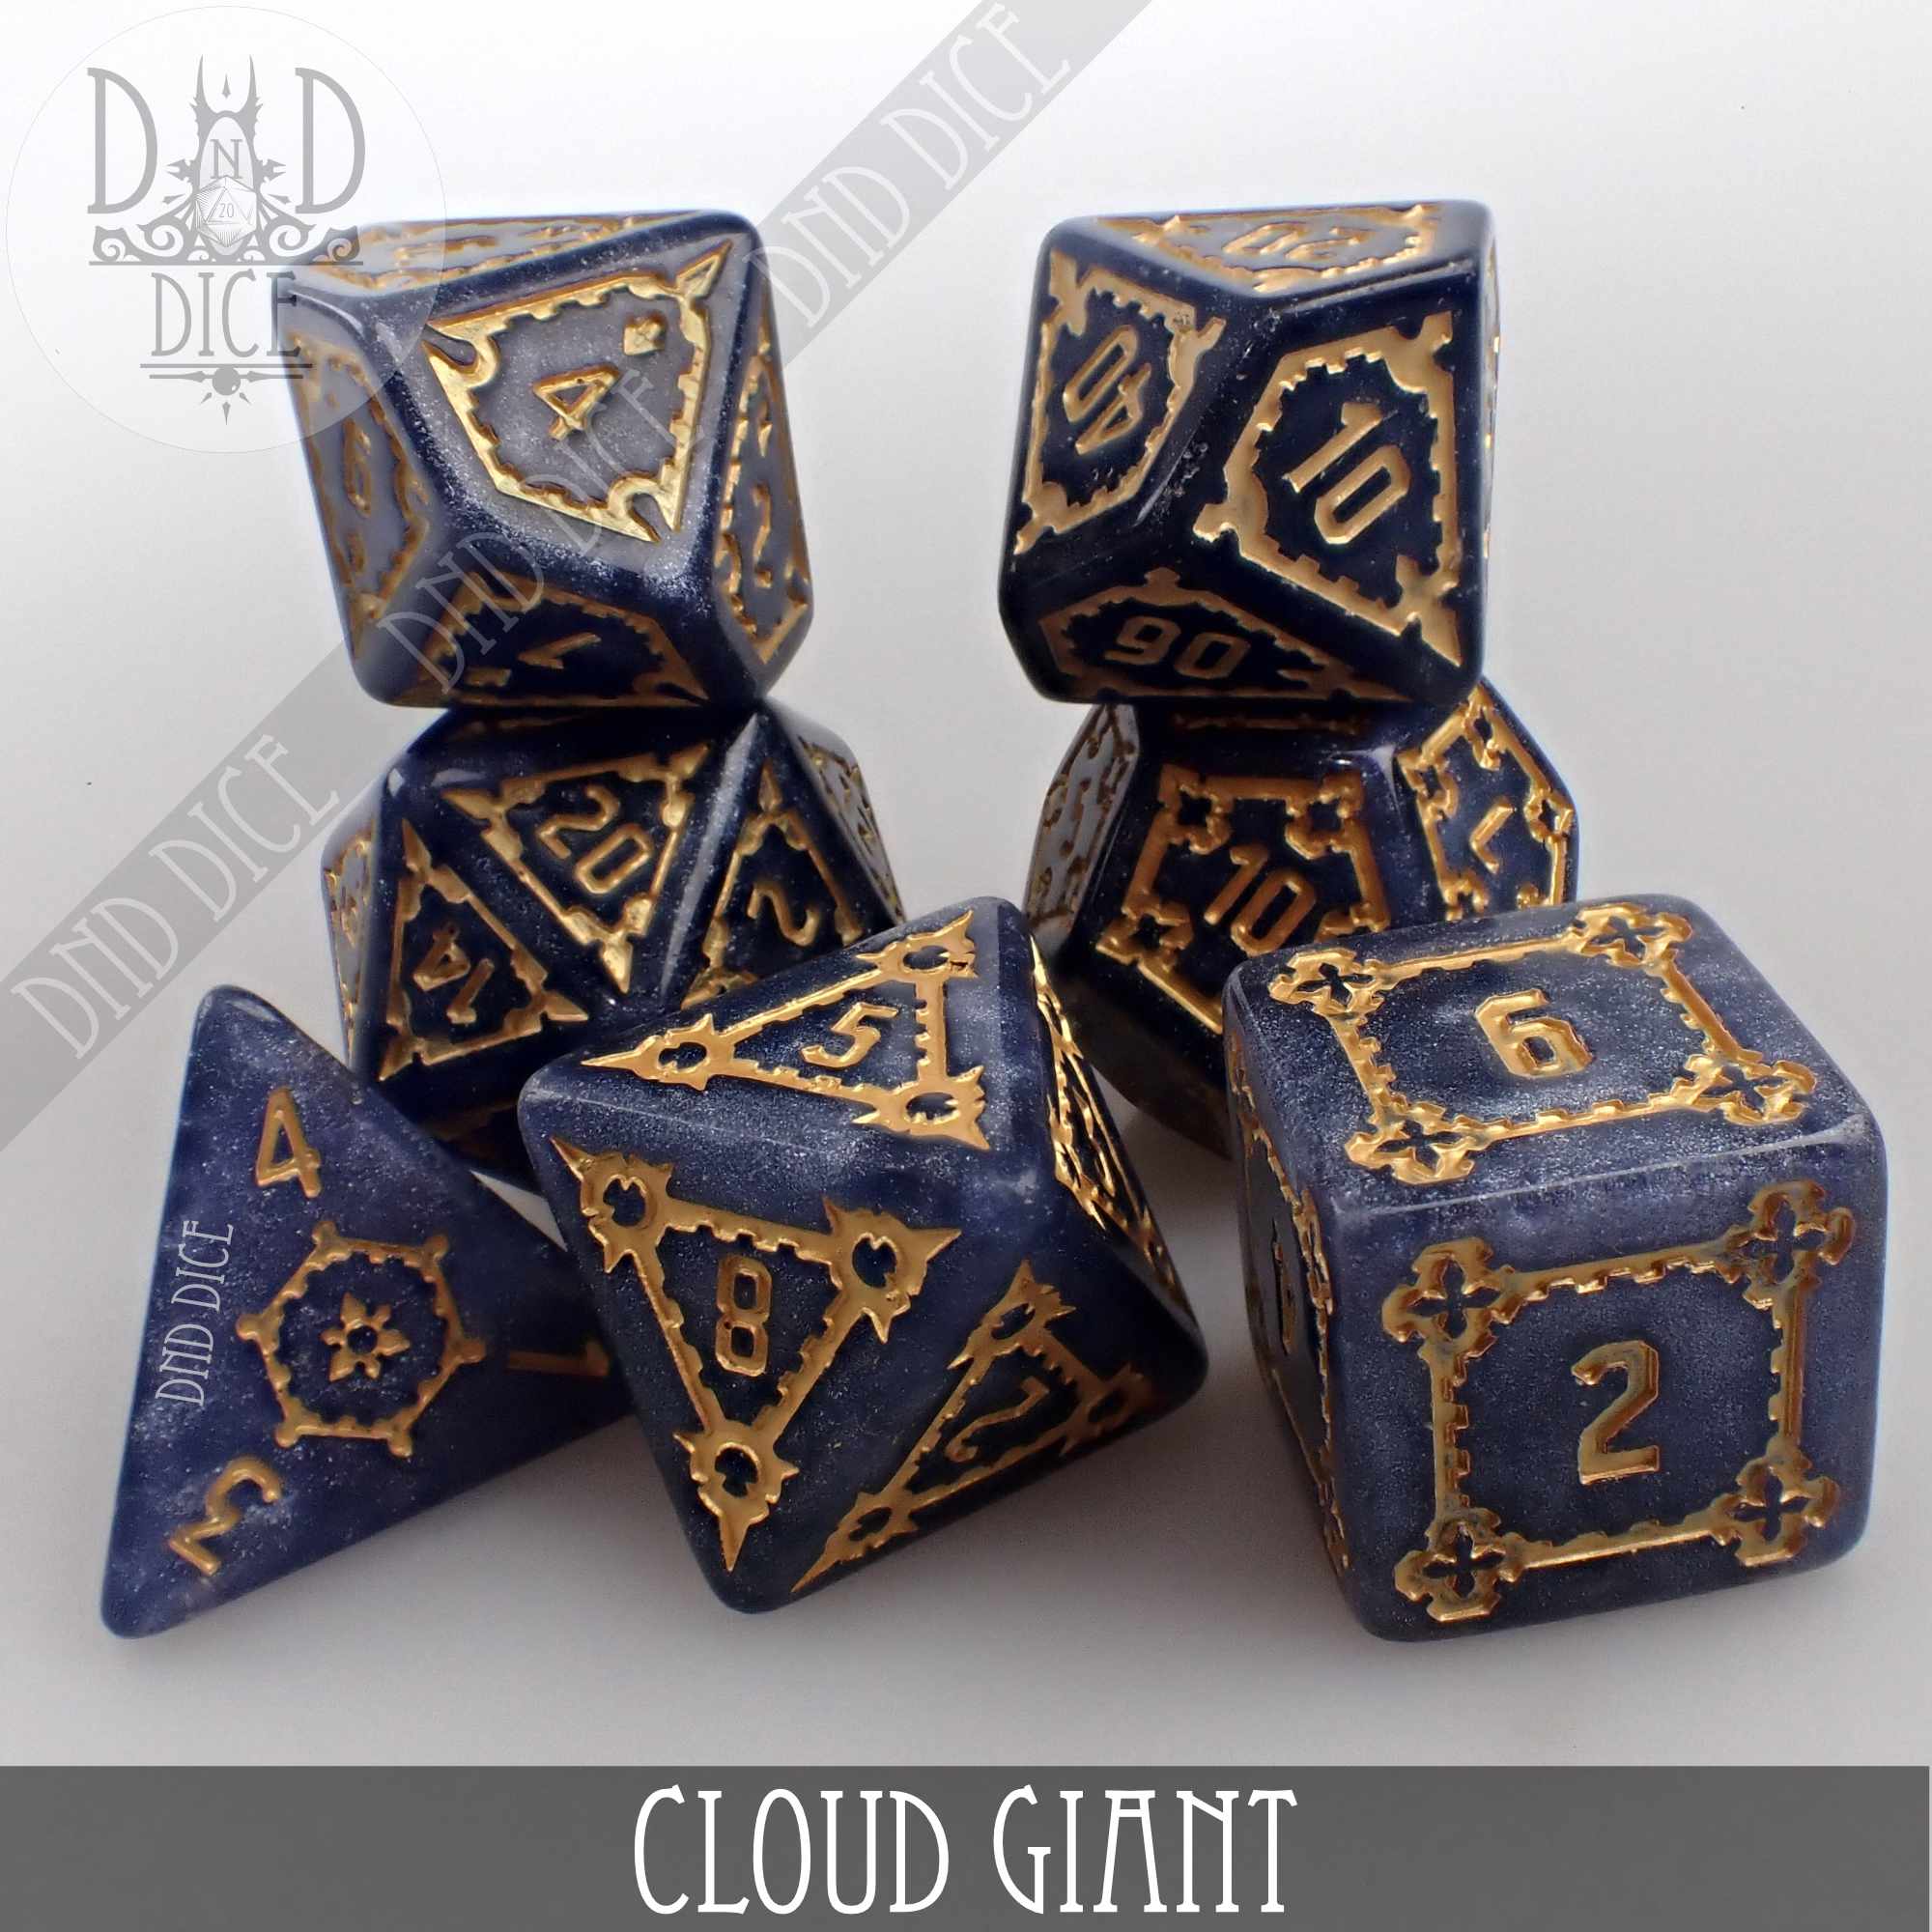 7 Dice Sets That Will Make Your Next D&D Character Shine (For Under 50$).